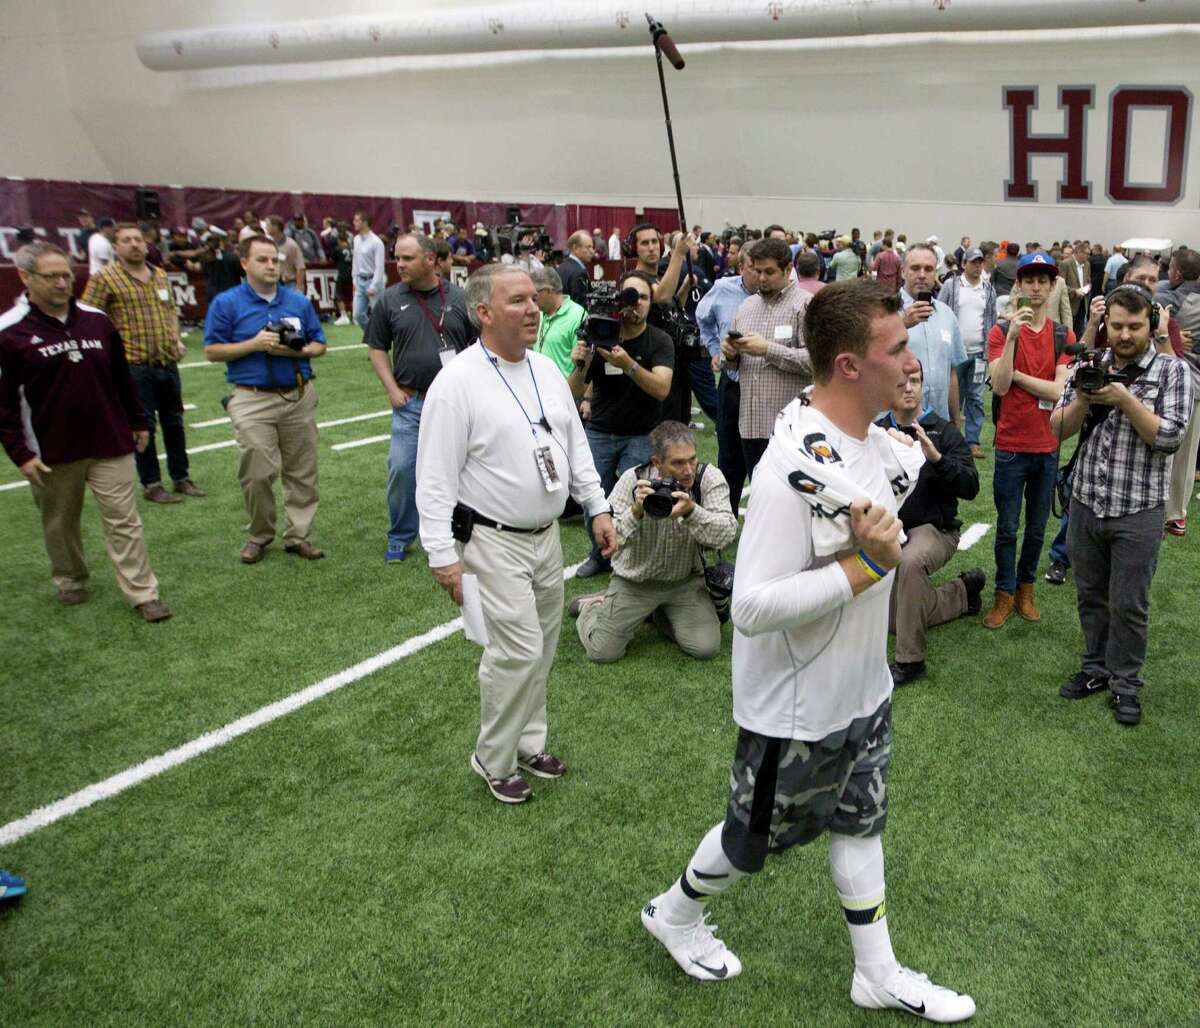 Johnny Manziel embraced the spotlight as Texas A&M's quarterback and drew quite the crowd for his his pro day in College Station on March 27.